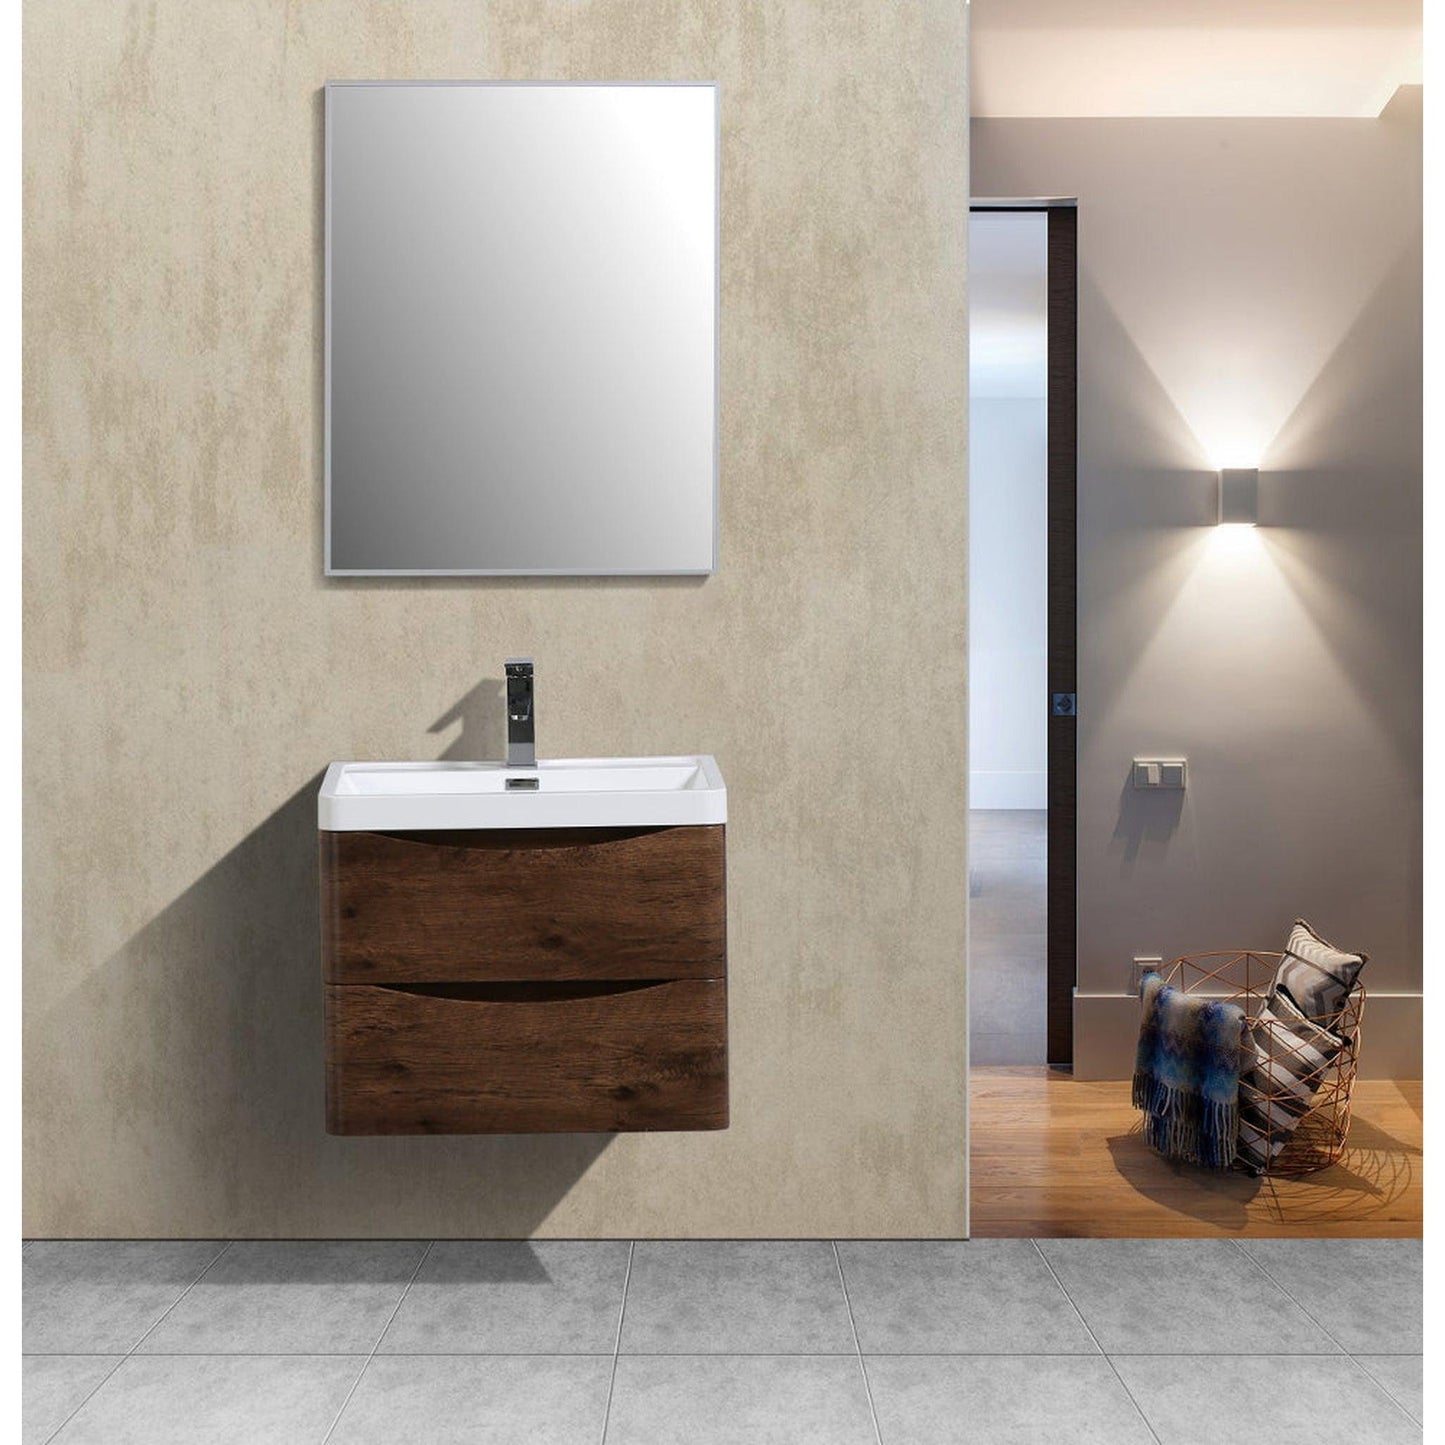 Eviva Smile 28" x 20" Rosewood Wall-Mounted Bathroom Vanity With White Single Integrated Sink